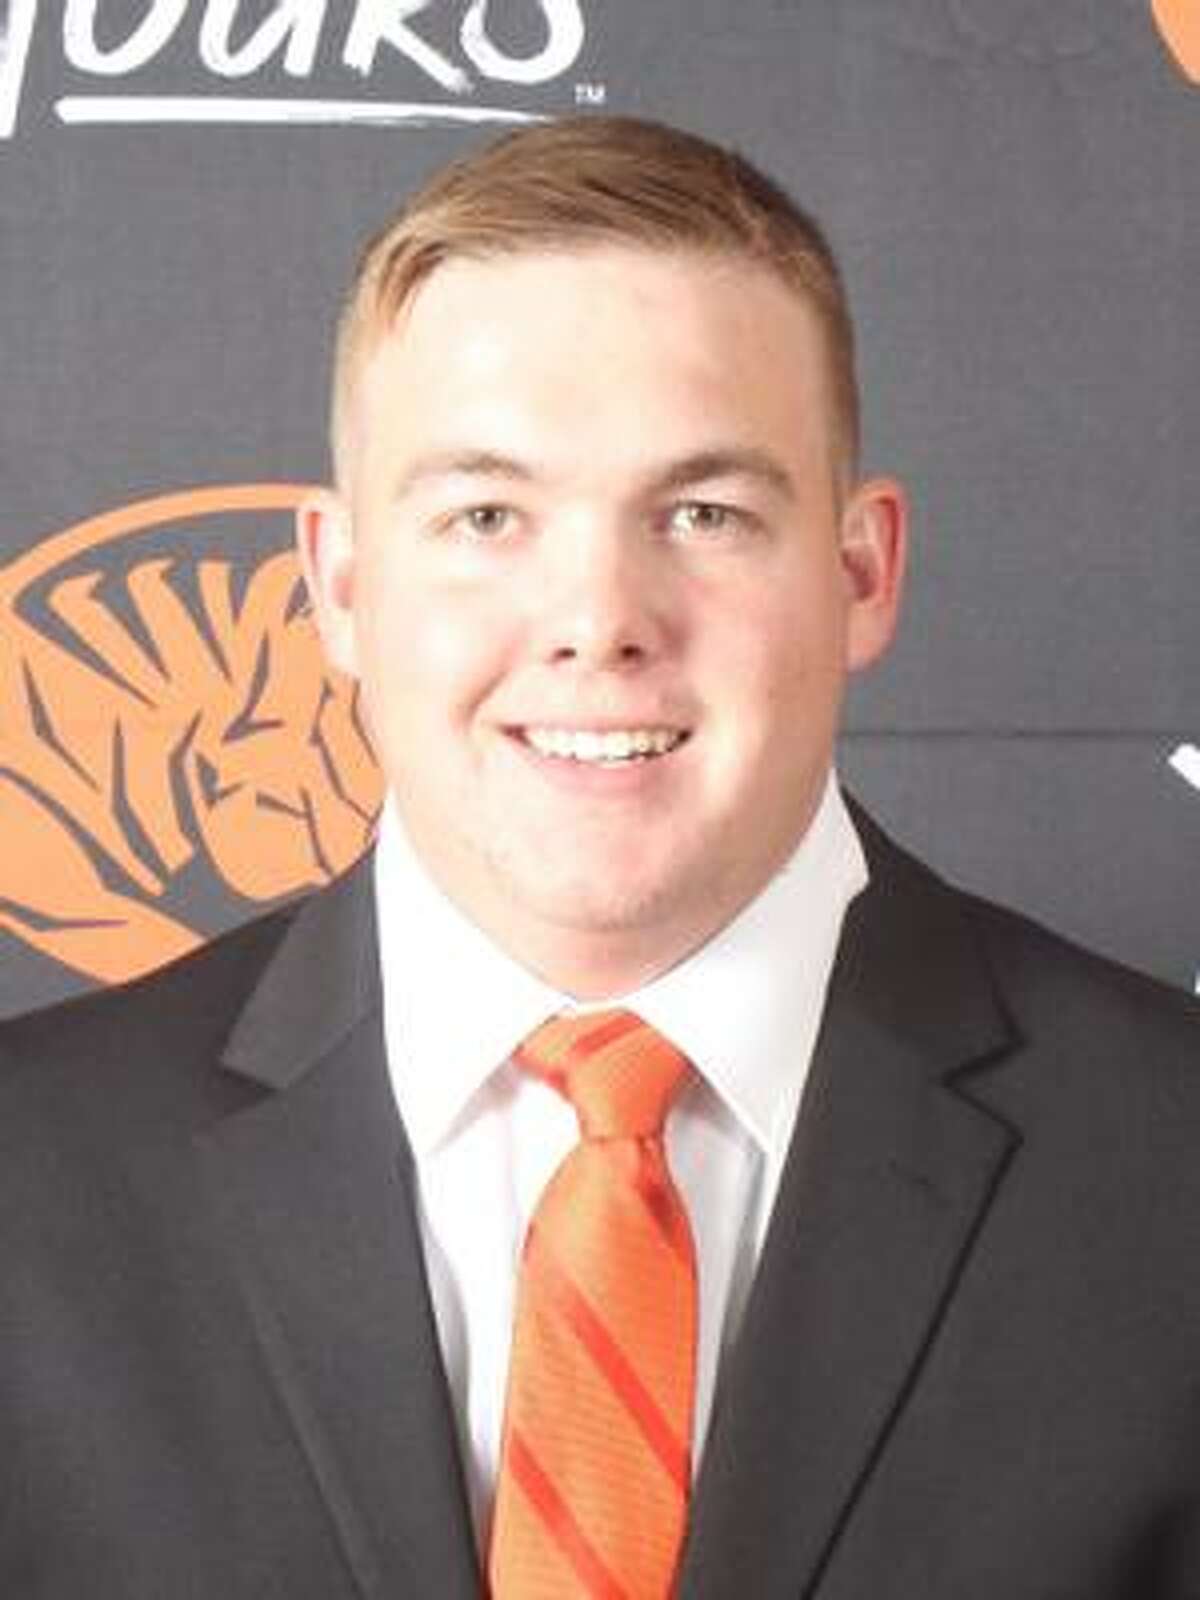 Former East Central University head coach Kris McCullough has been hired to lead the UT-Permian Basin football program